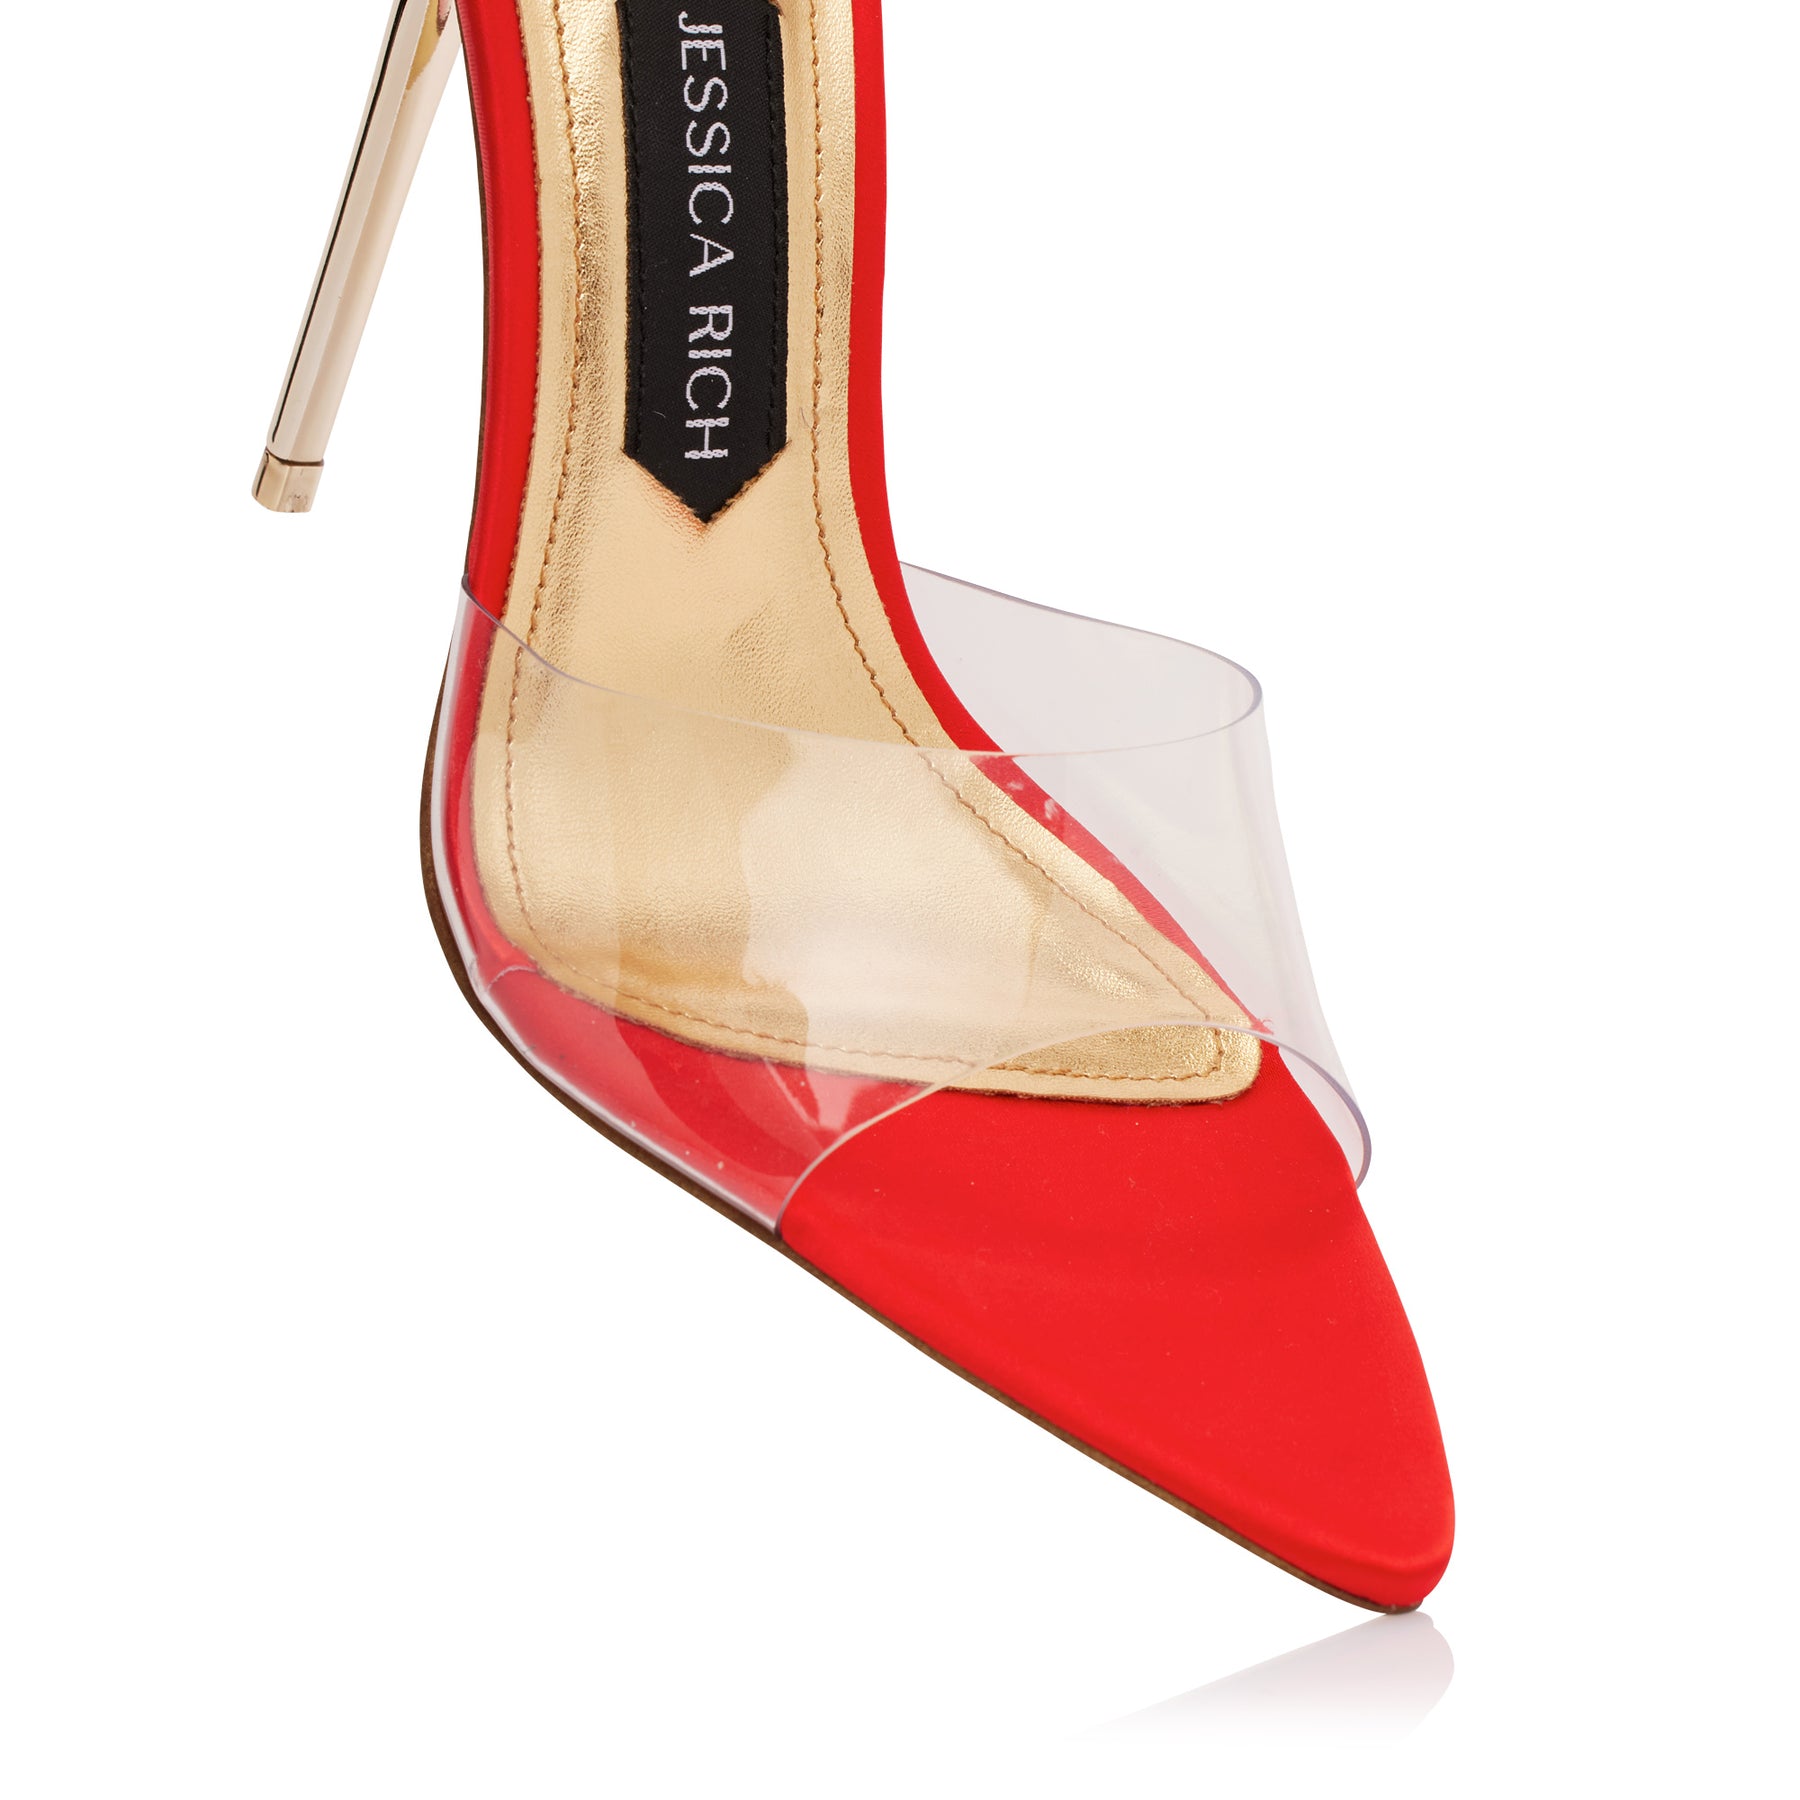 RACY MULE 120 MM | SATIN RED